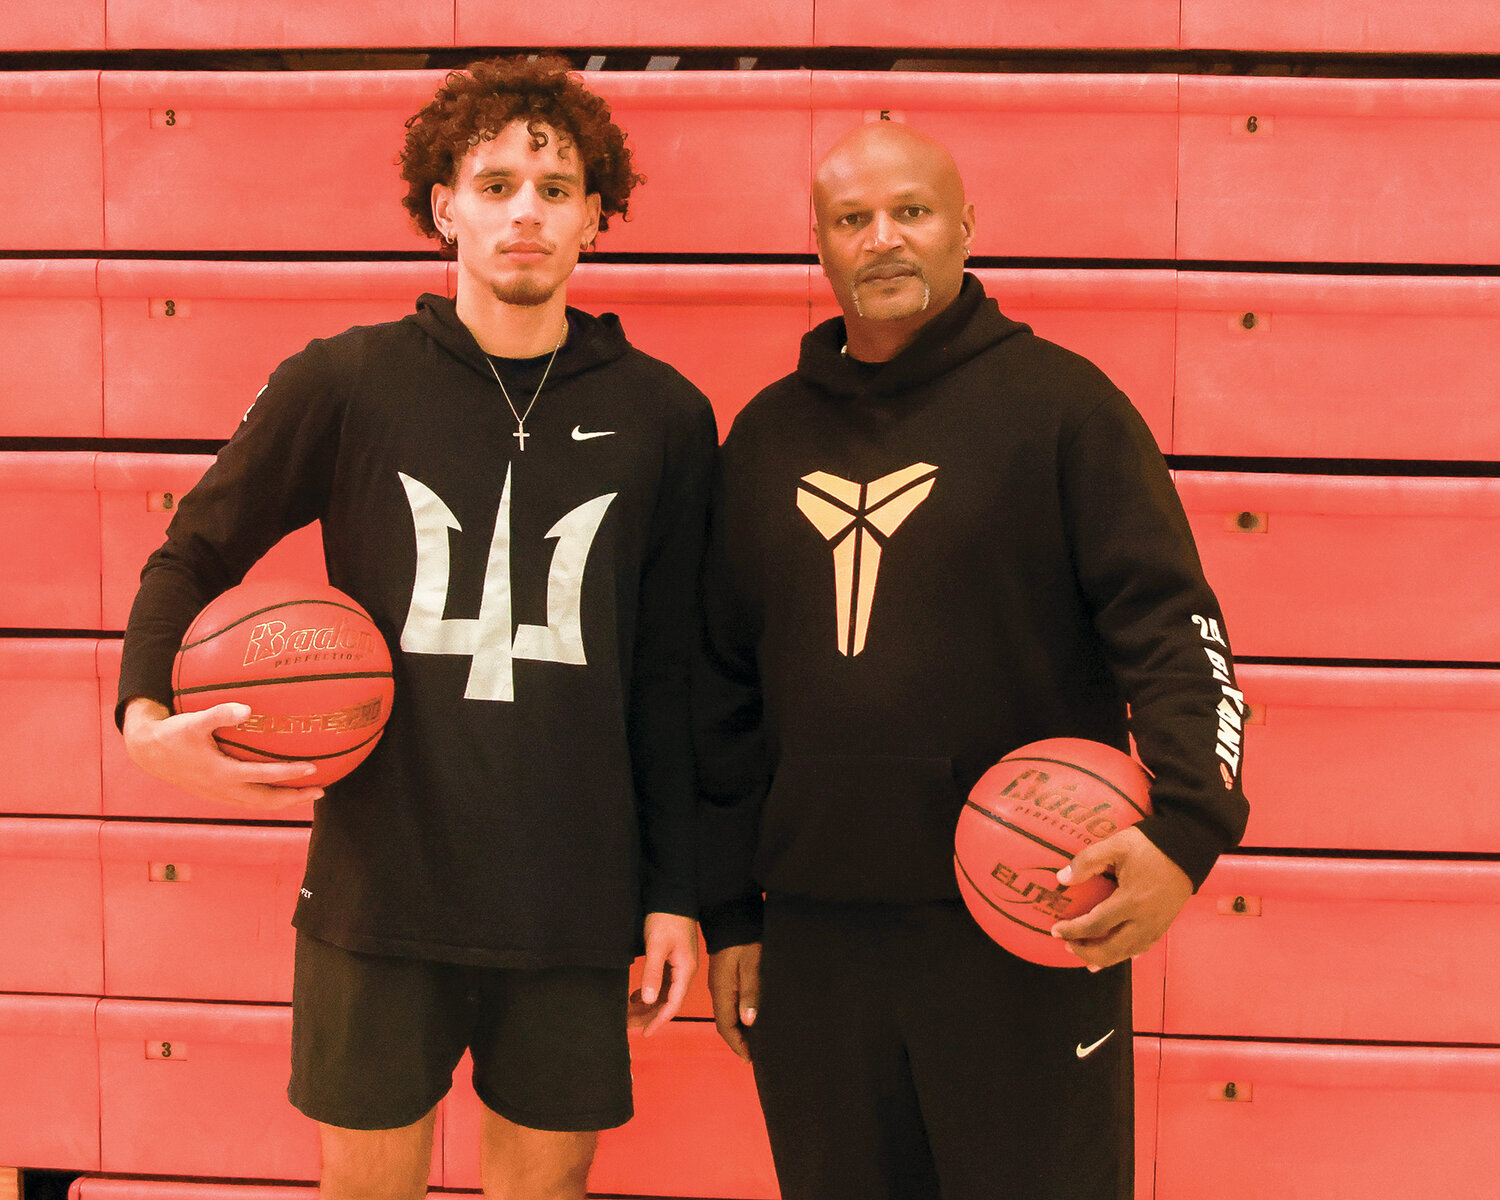 Battle Ground basketball’s new father-son coaching duo: head coach Brett Johnson, right, brings years of experience while his son, Squeeky Johnson, brings post-college basketball knowledge to the Tigers.